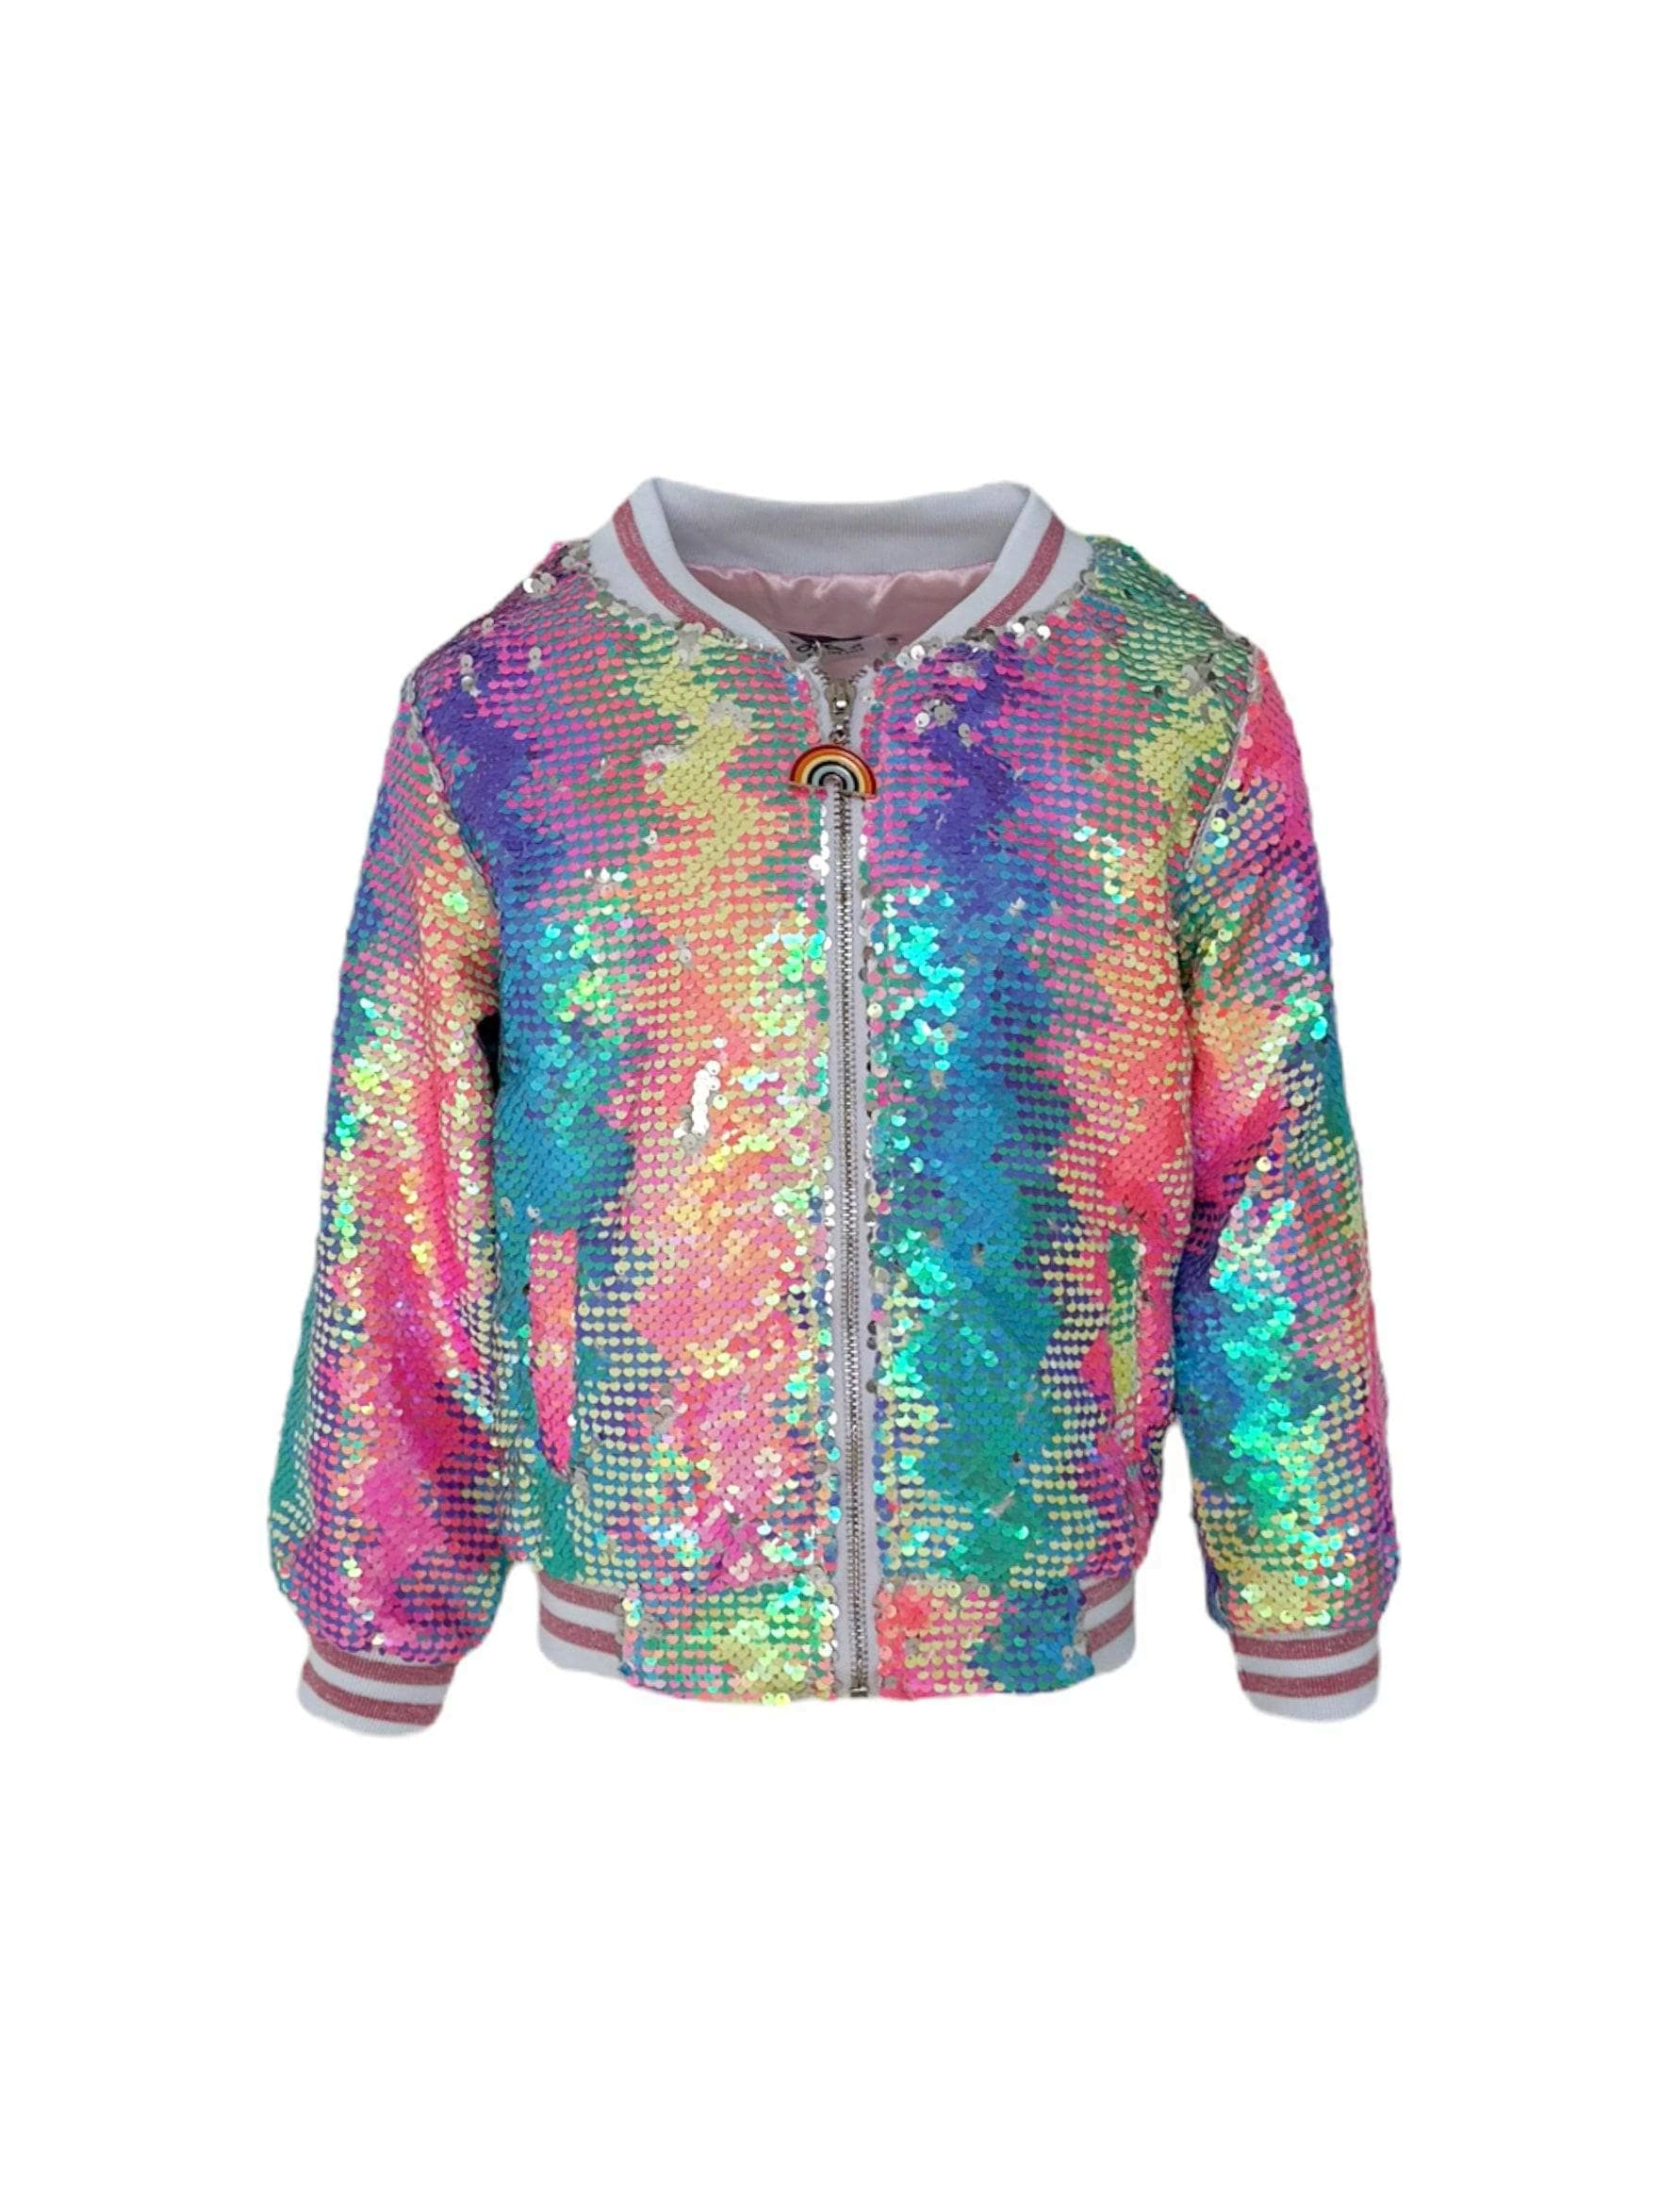 Kaleidoscope Sequin Bomber | Lola and the Boys | Iris Gifts & Décor